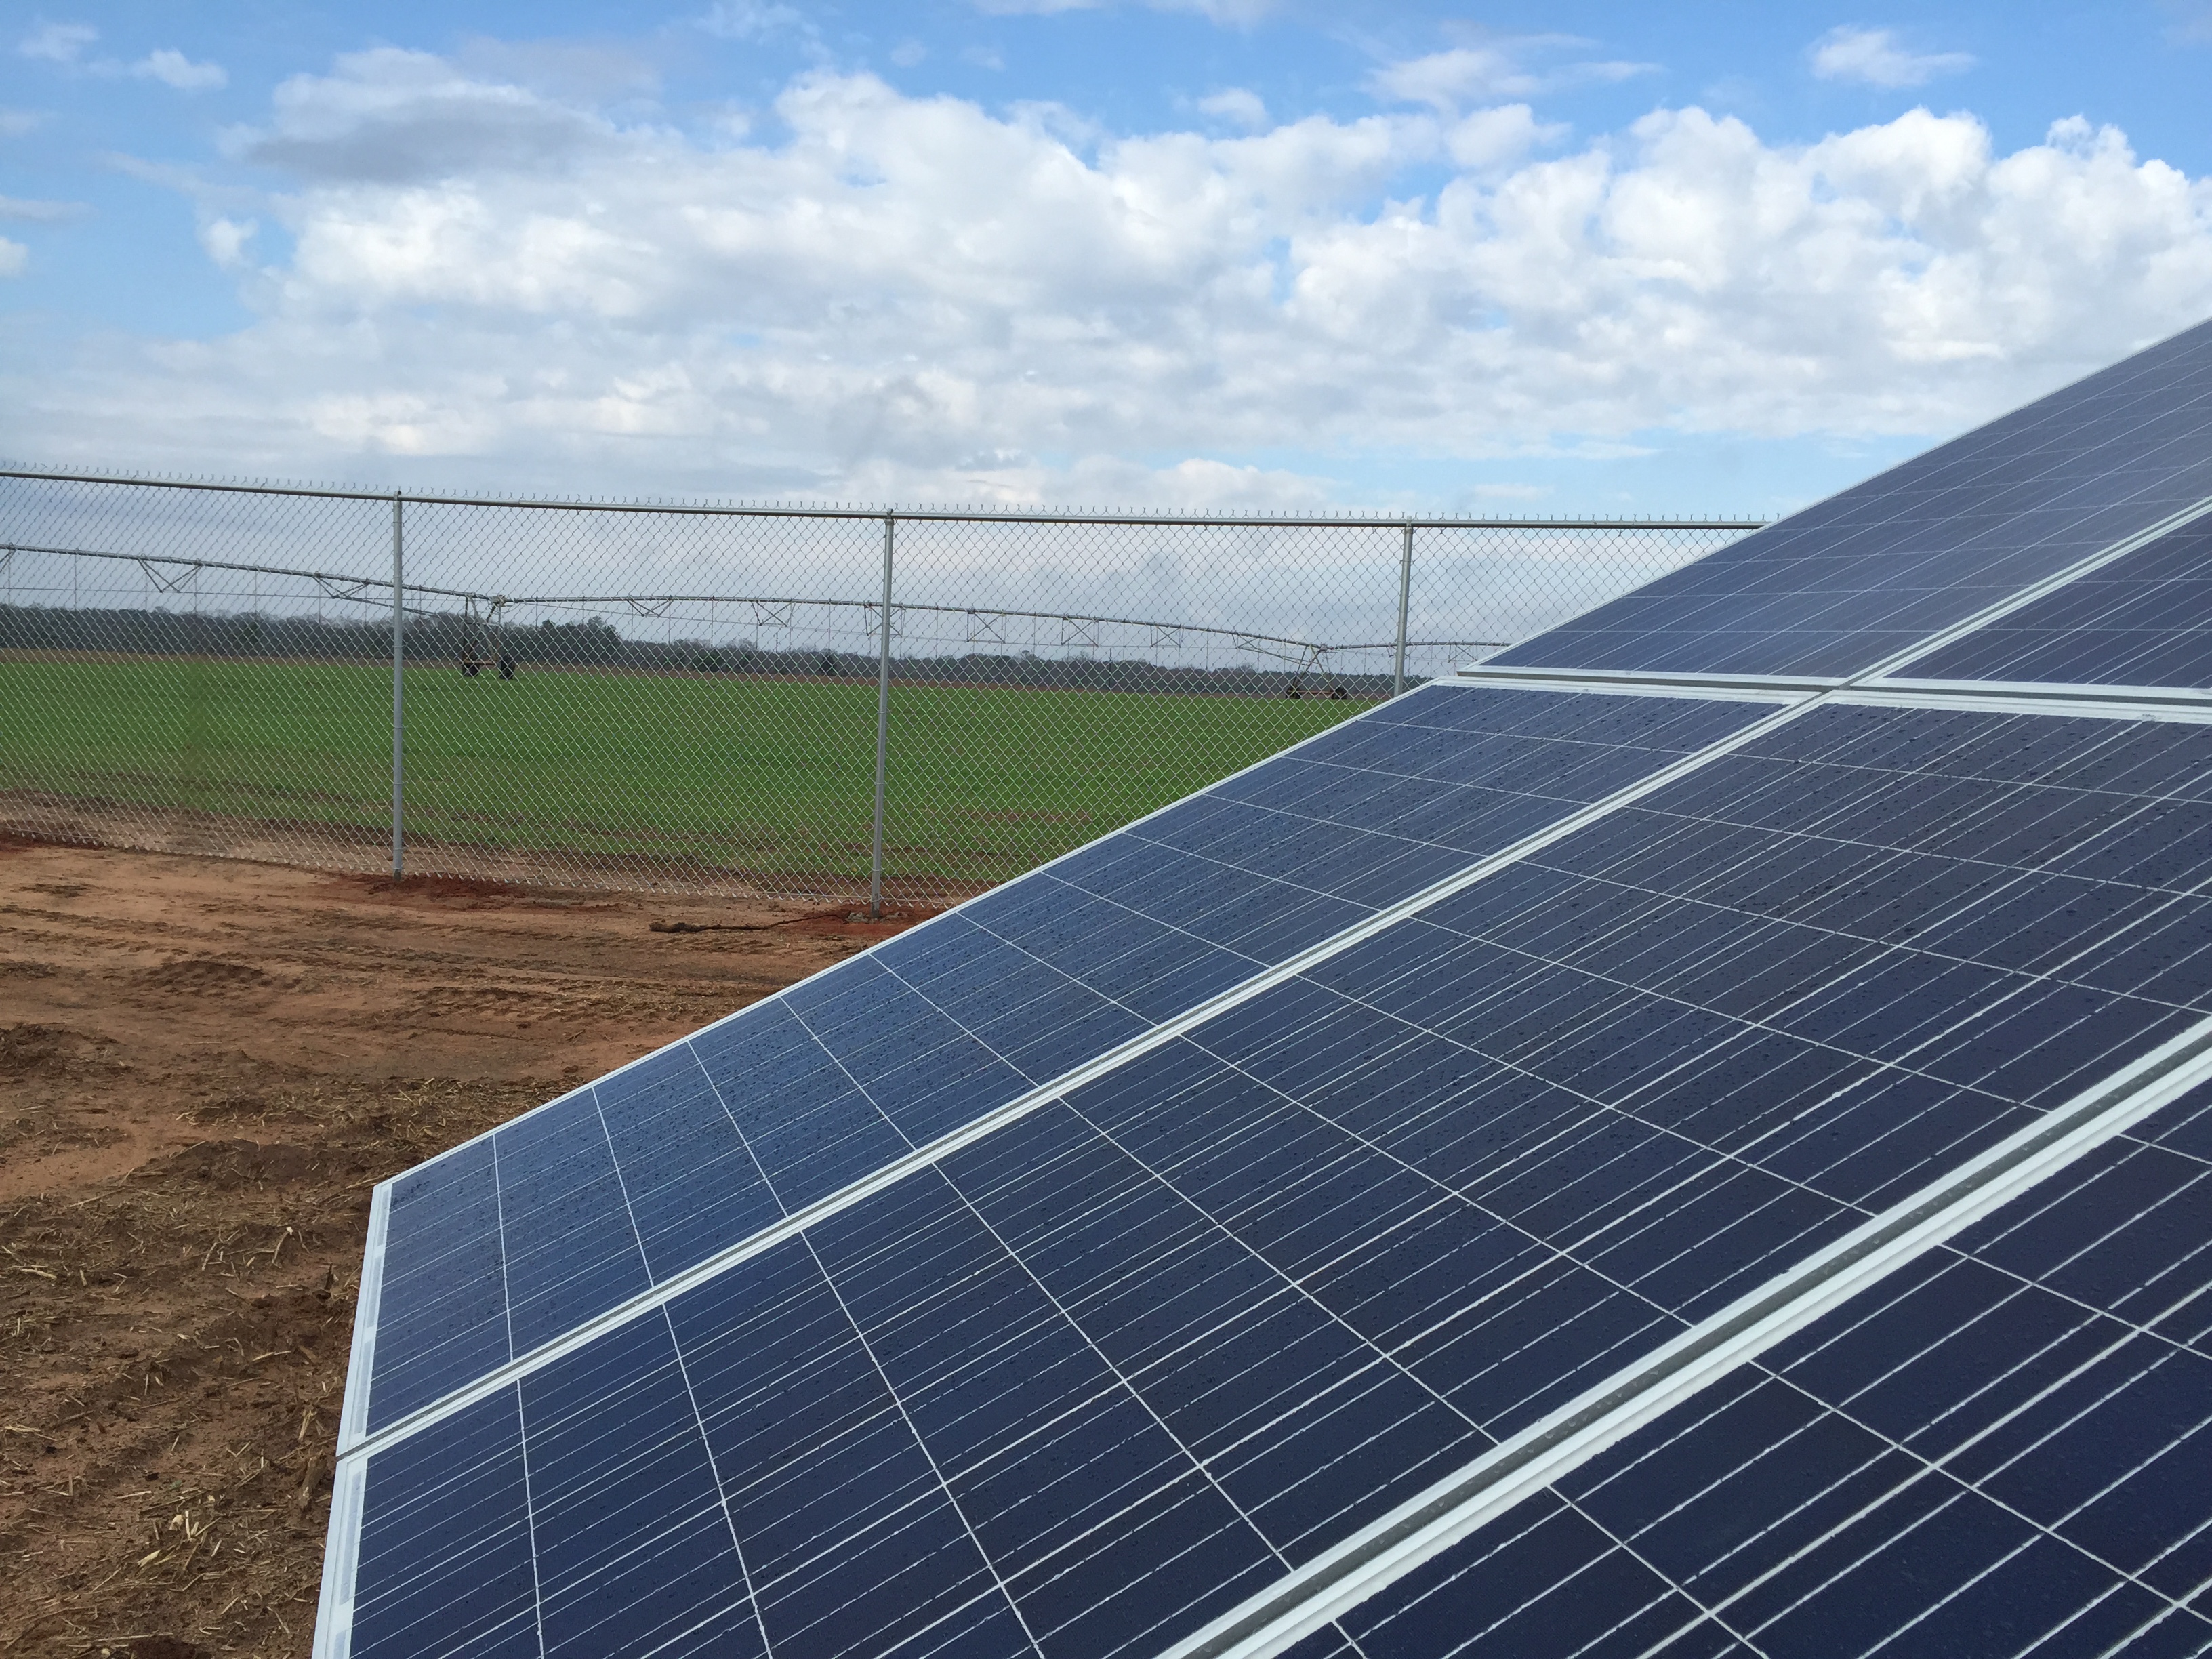 Close up of the photovoltaic cells at Super-Sod's turf farm, with turf production fields in the background.